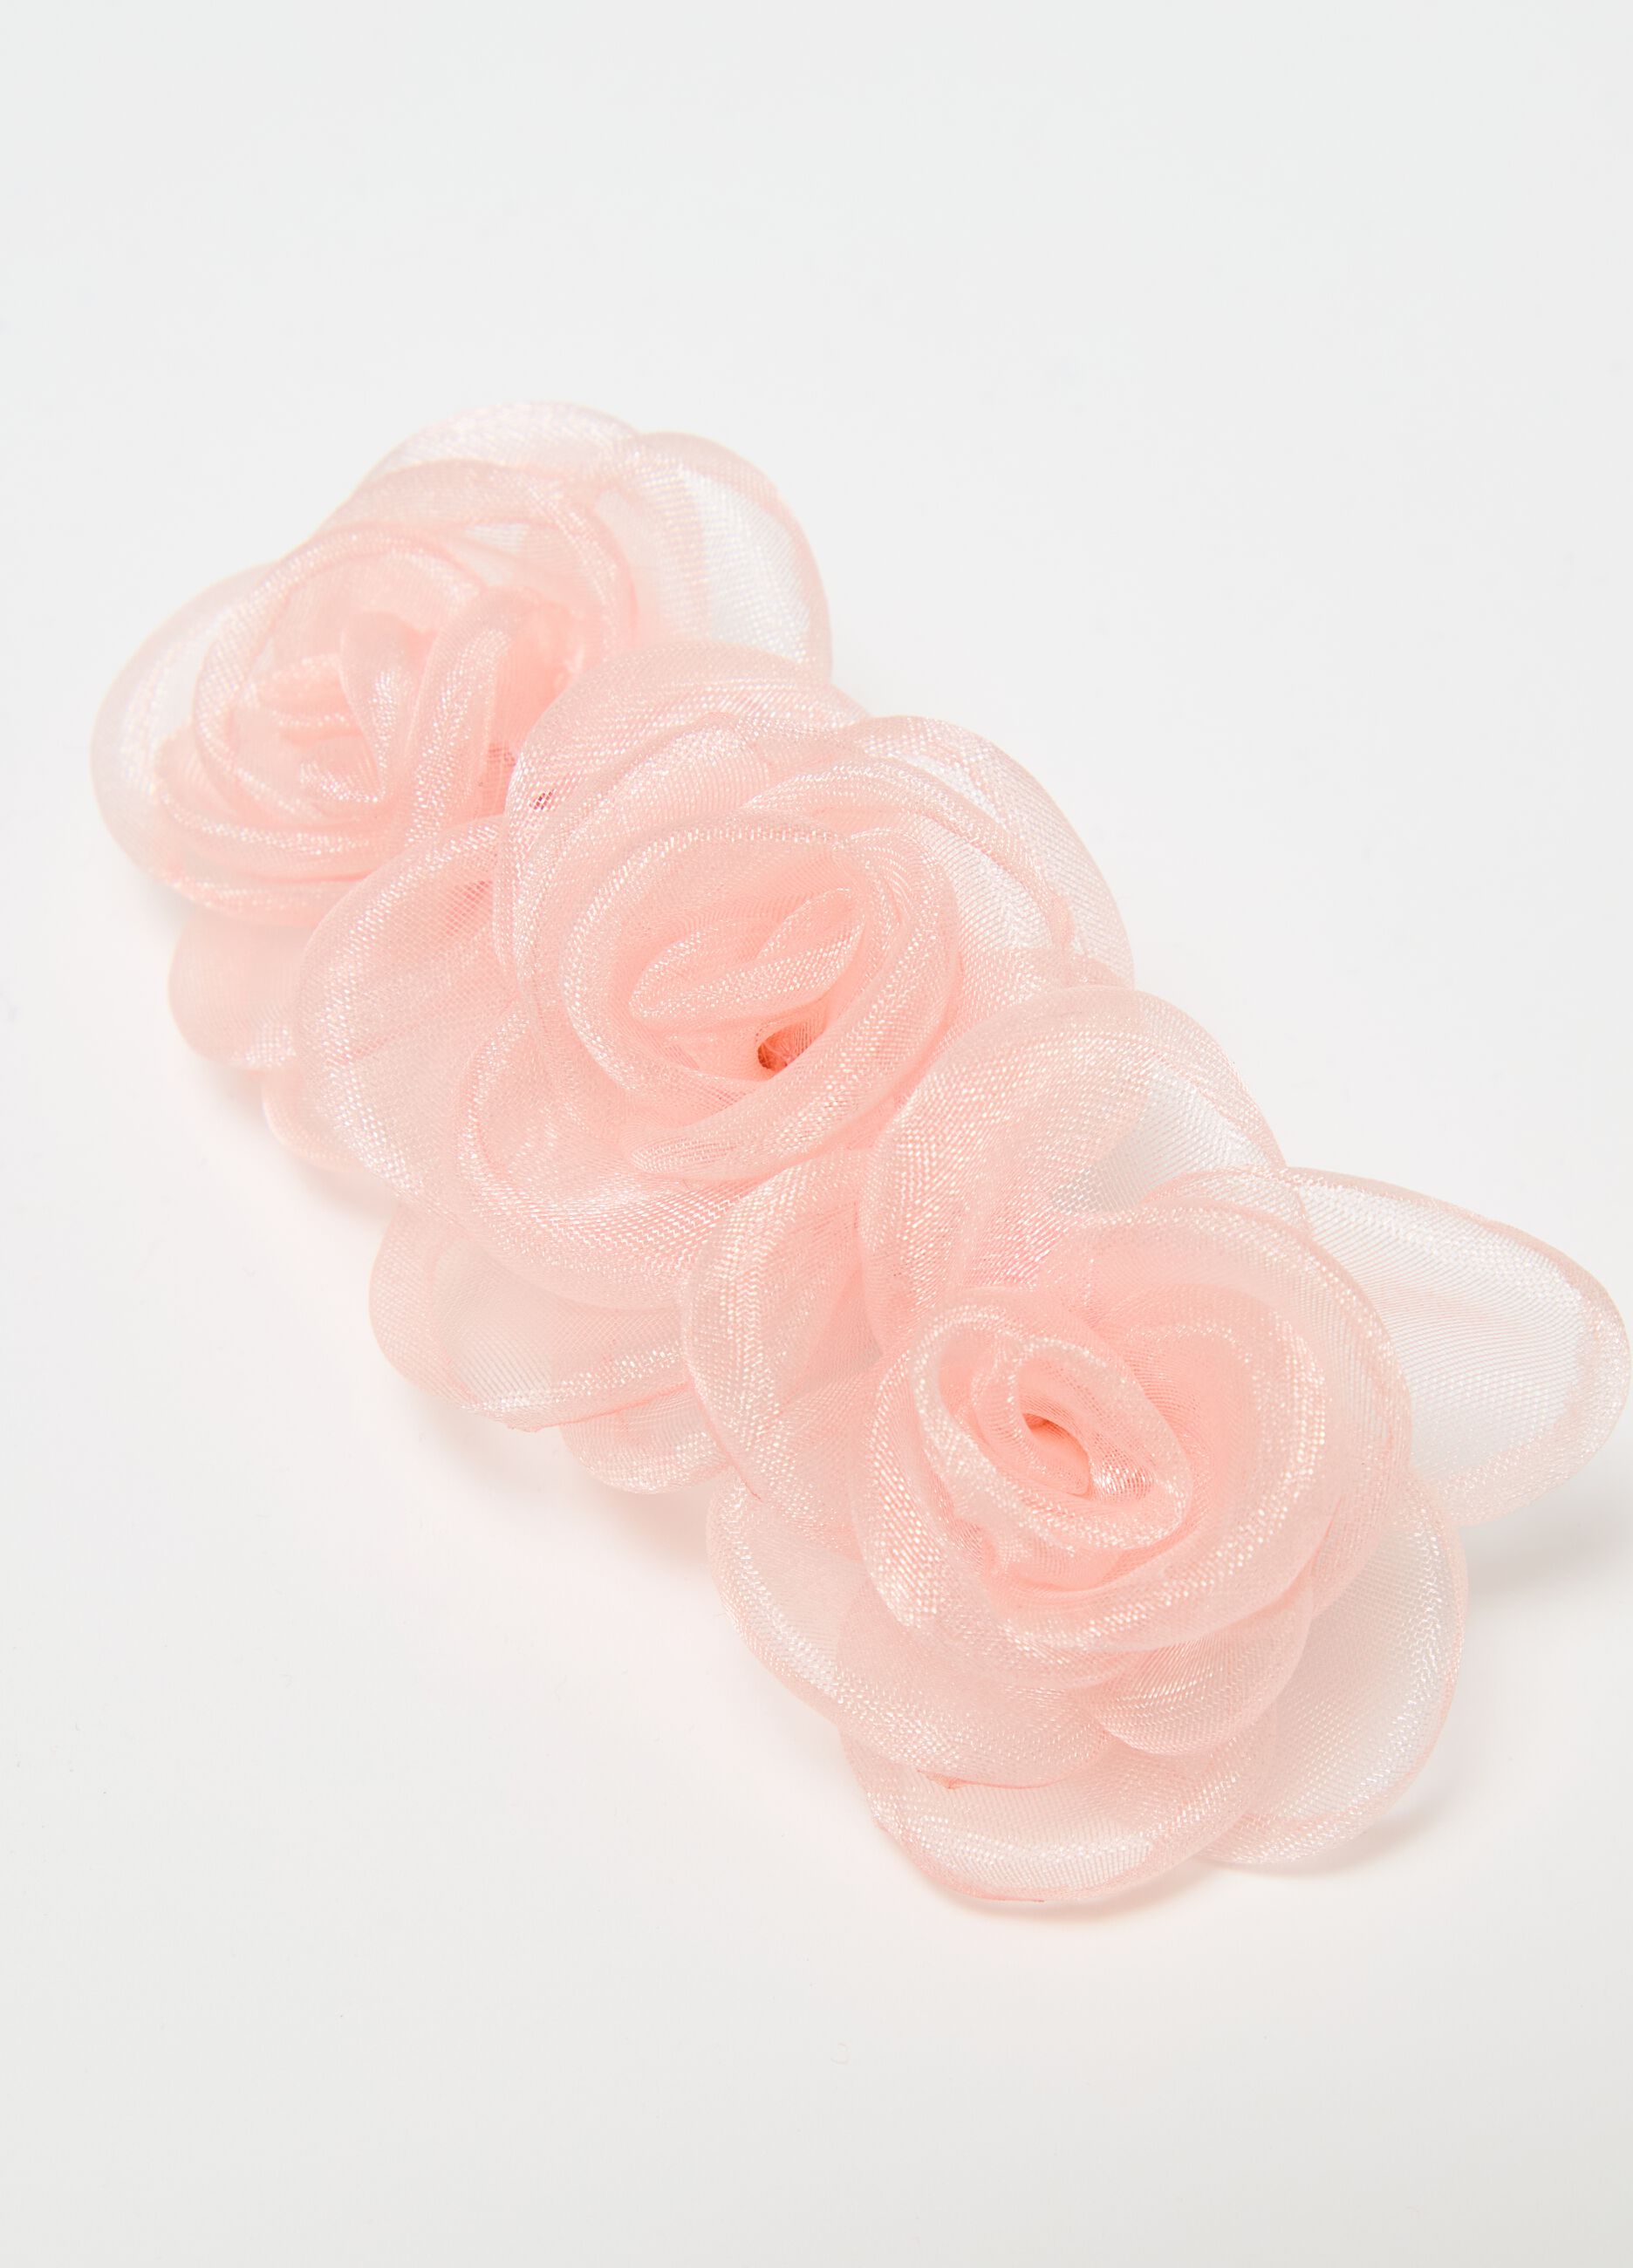 Hair clip with flowers